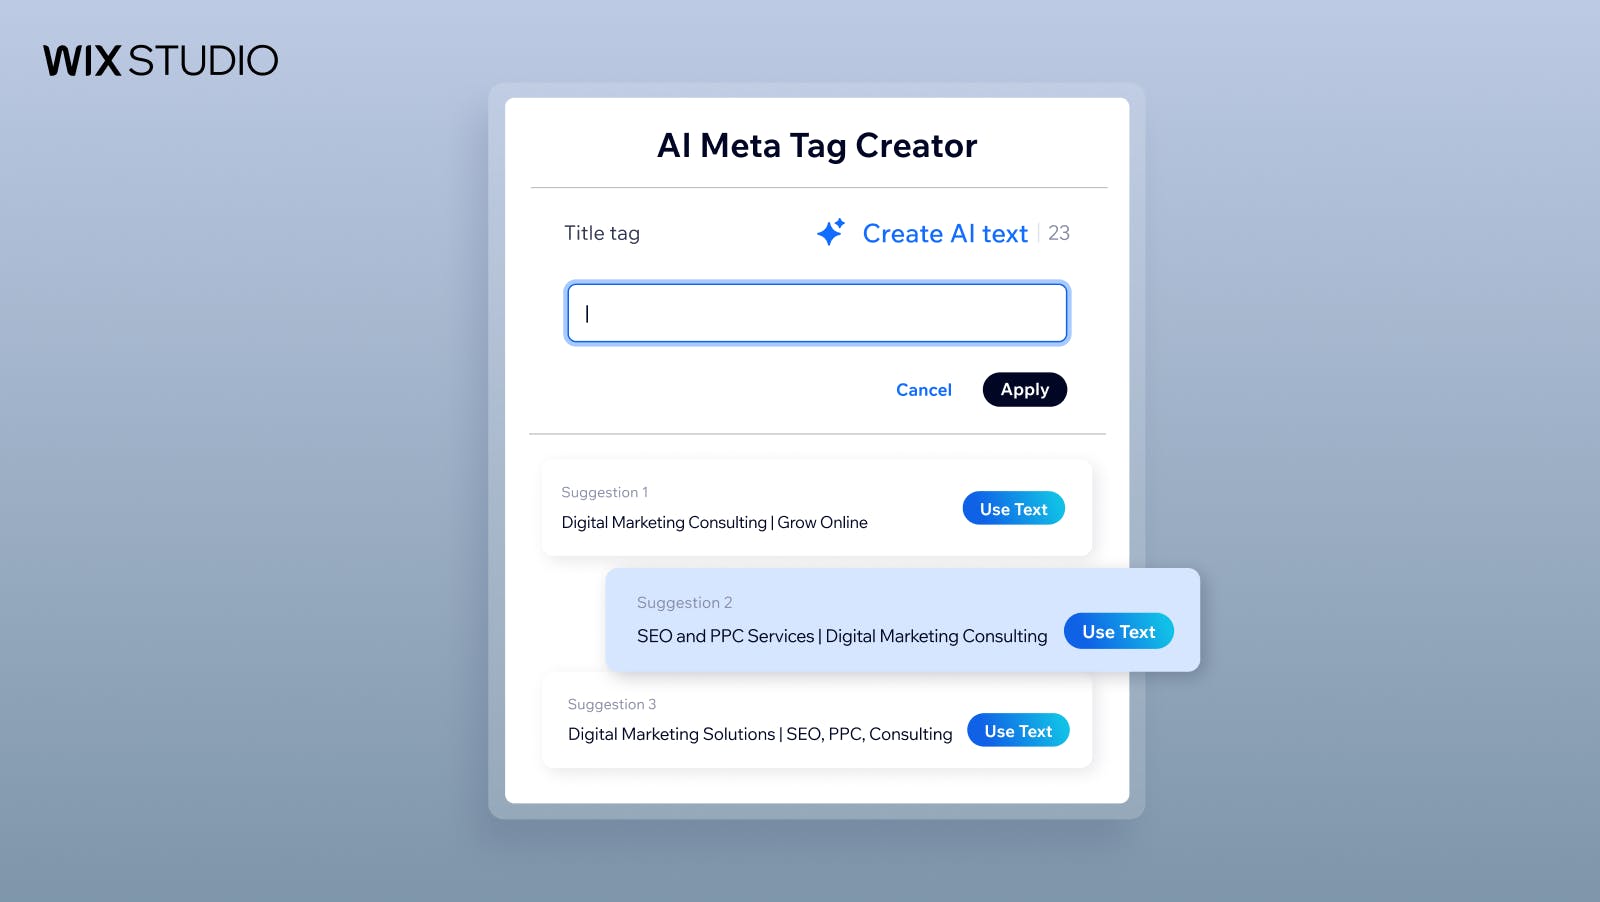 Wix launches new AI Meta Tag Creator to help you streamline your SEO workflows